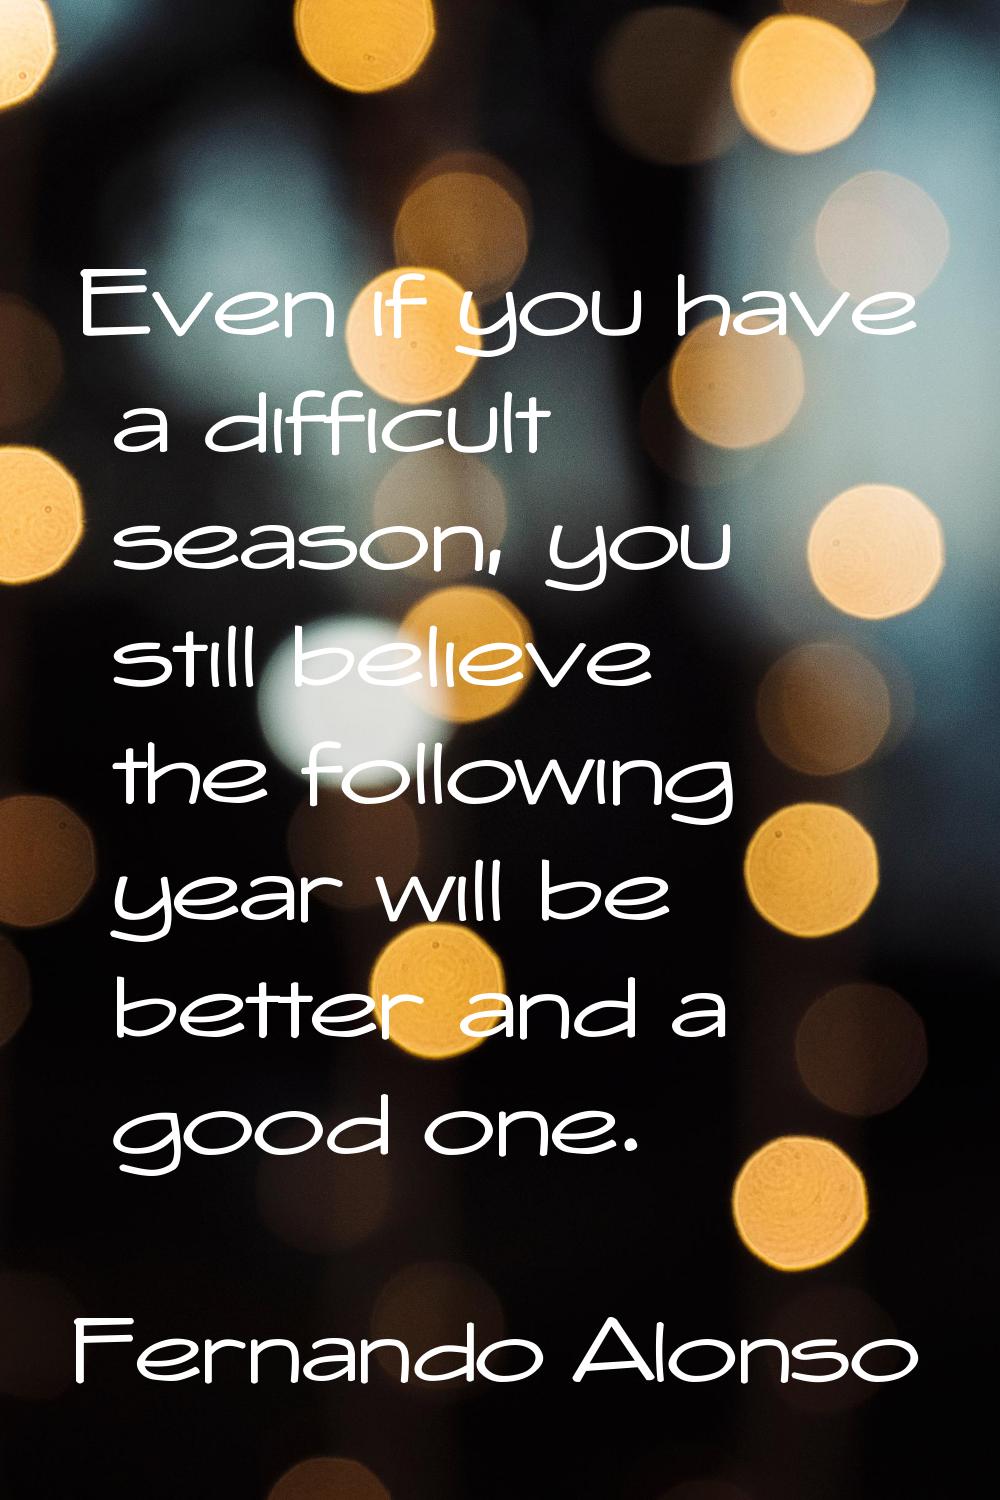 Even if you have a difficult season, you still believe the following year will be better and a good